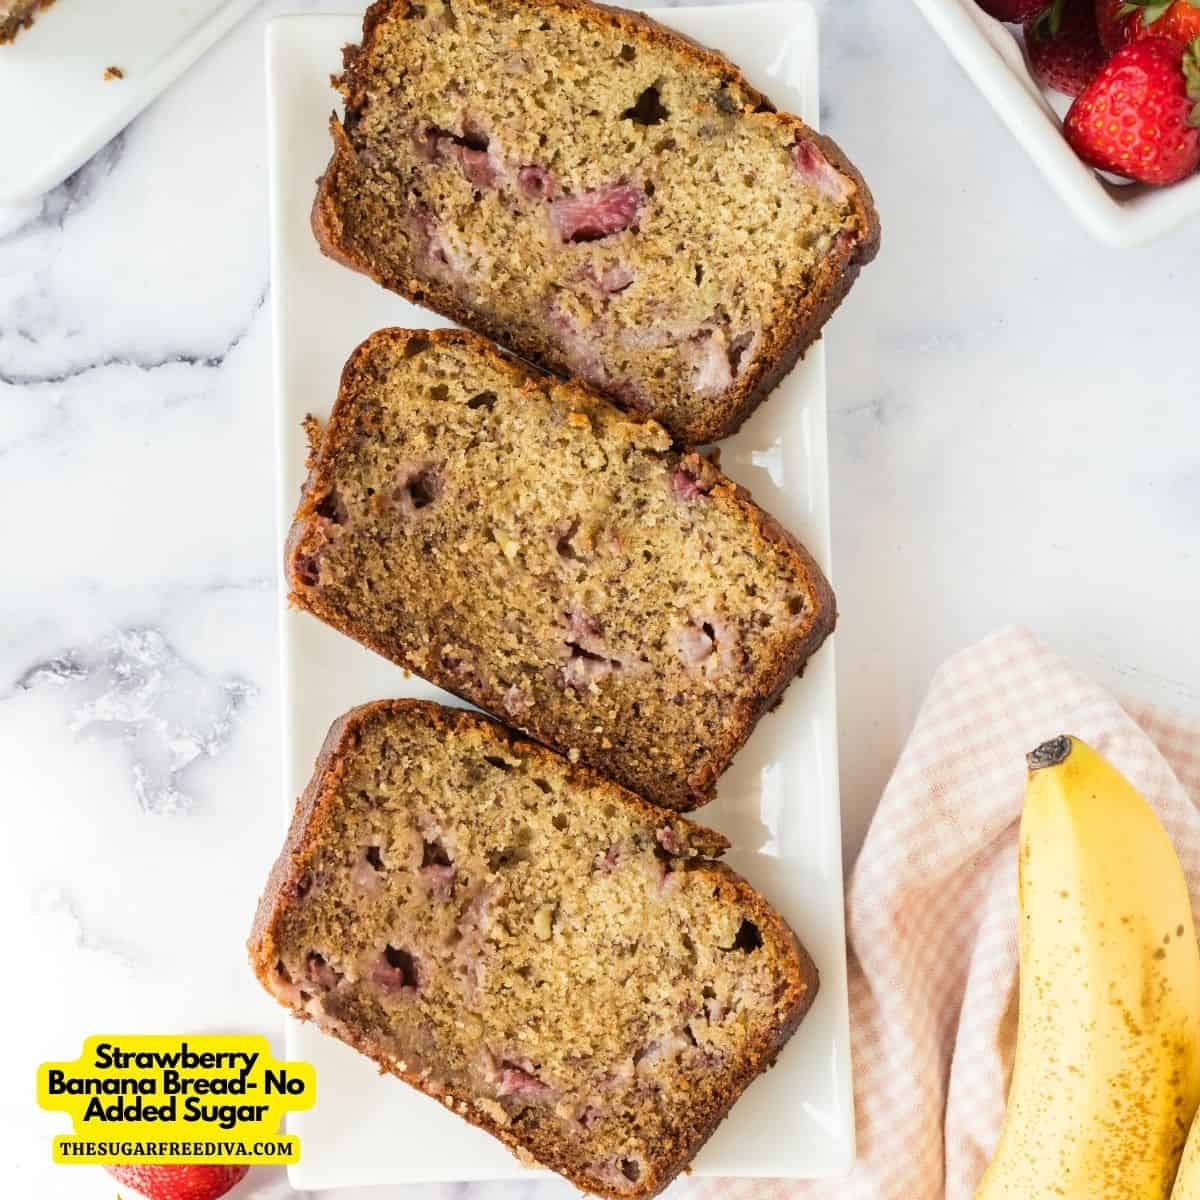 Strawberry Banana Bread, a simple, moist, and delicious quick bread recipe made with fresh strawberries and No Added Sugar